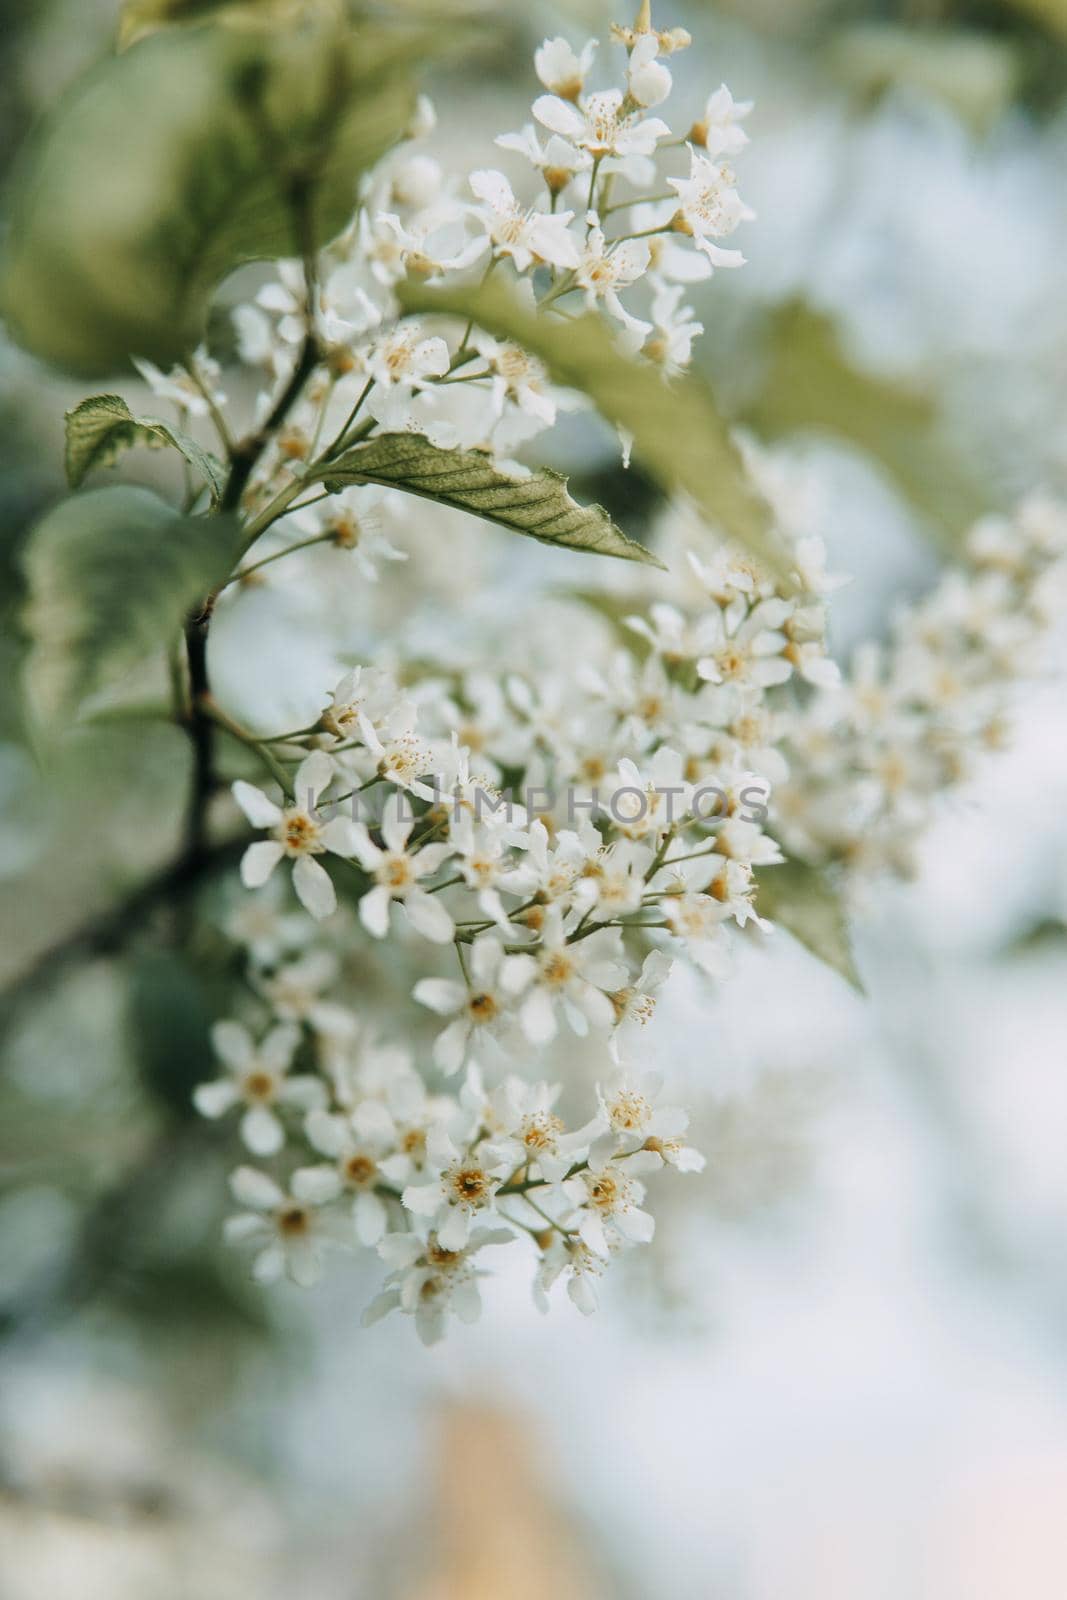 Blooming cherry branches with white flowers close-up, background of spring nature. Macro image of vegetation, close-up with depth of field. by Annu1tochka